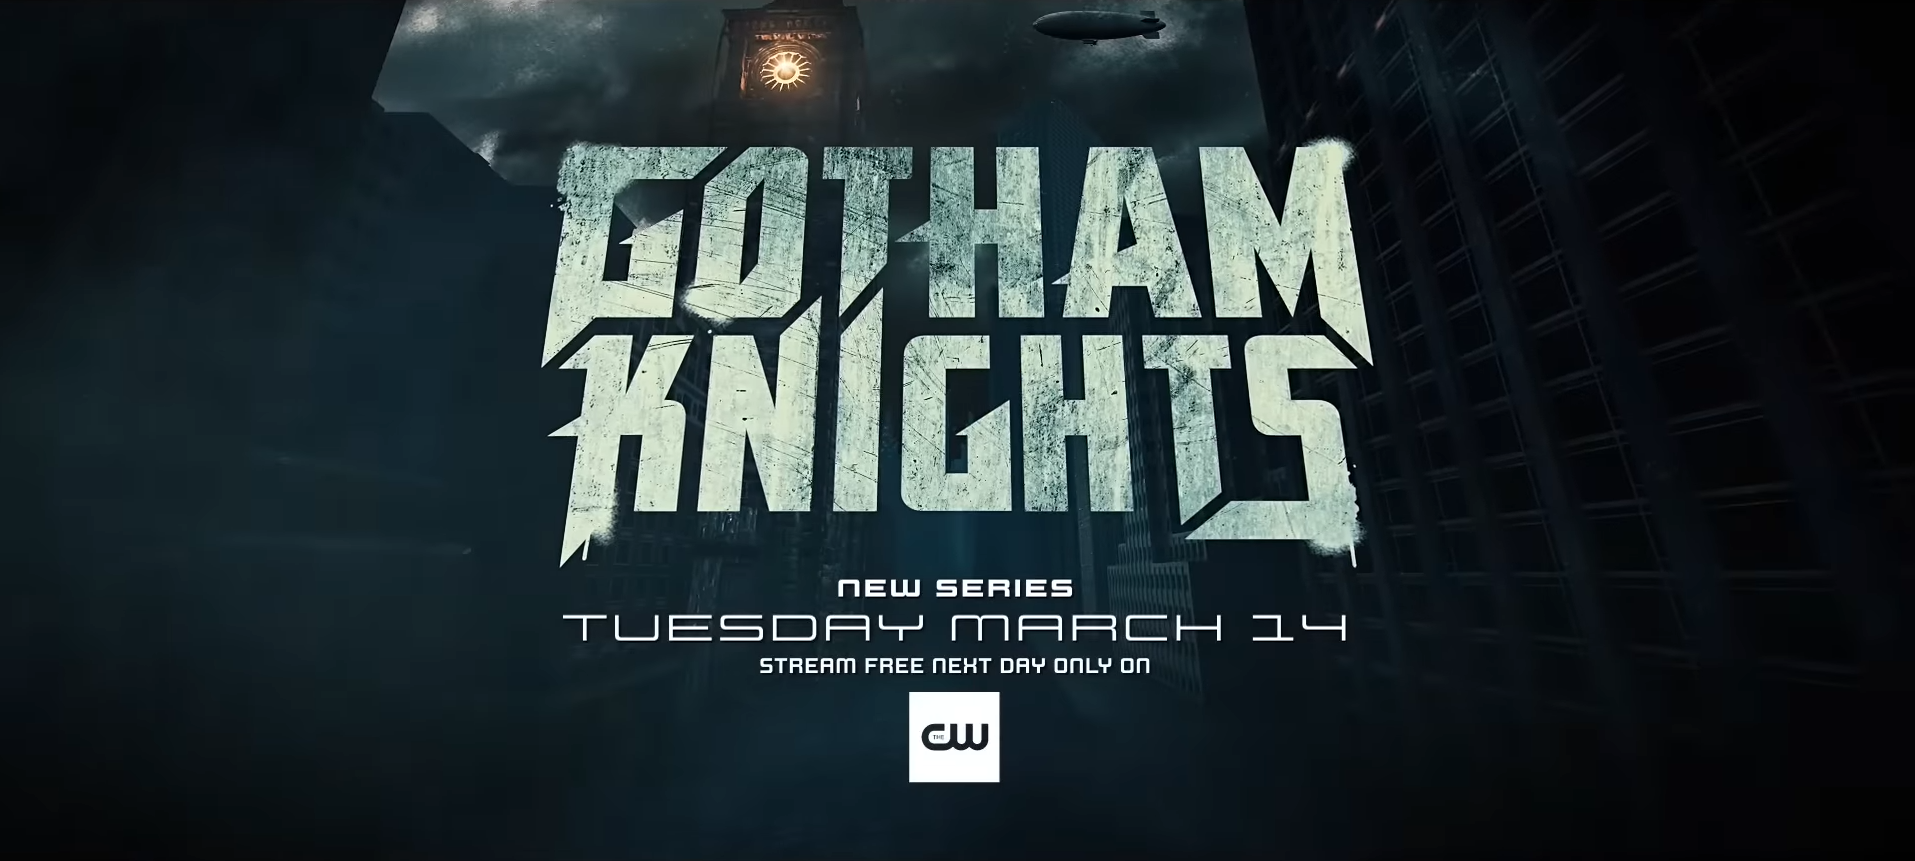 Is Gotham Knights TV Show Based On The Video Game?